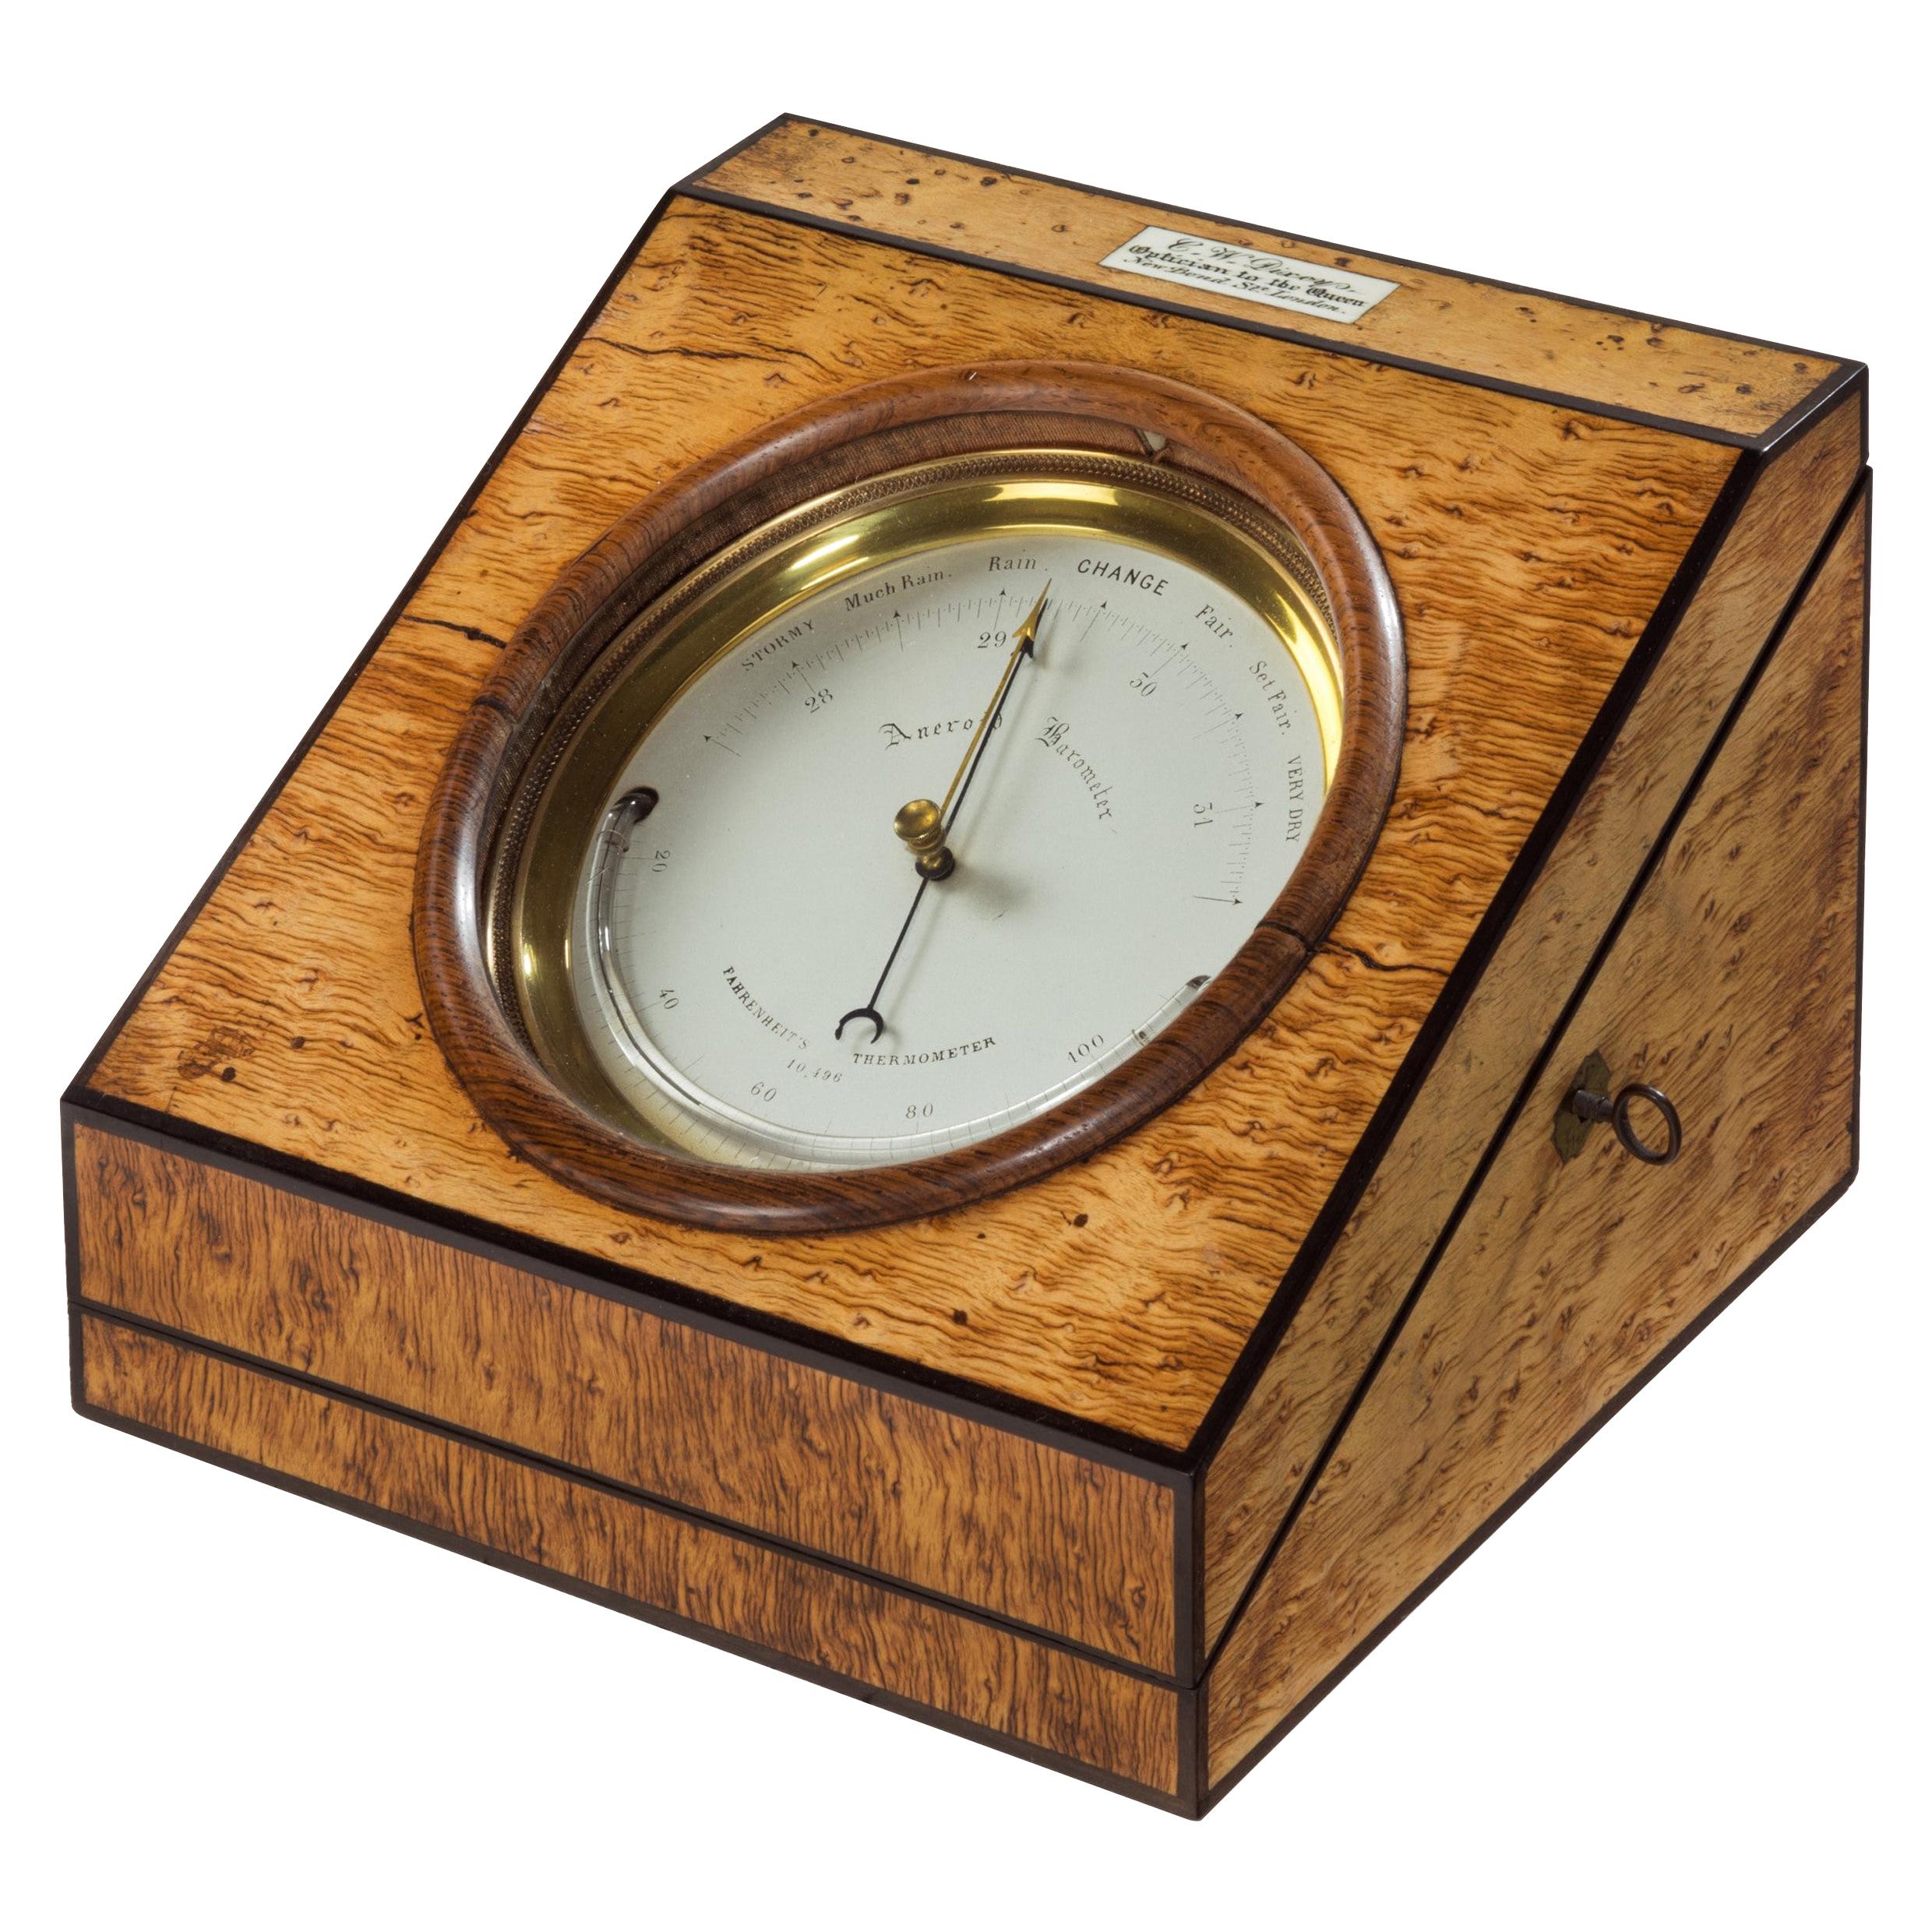 Aneroid Desk Barometer by C W Dixey